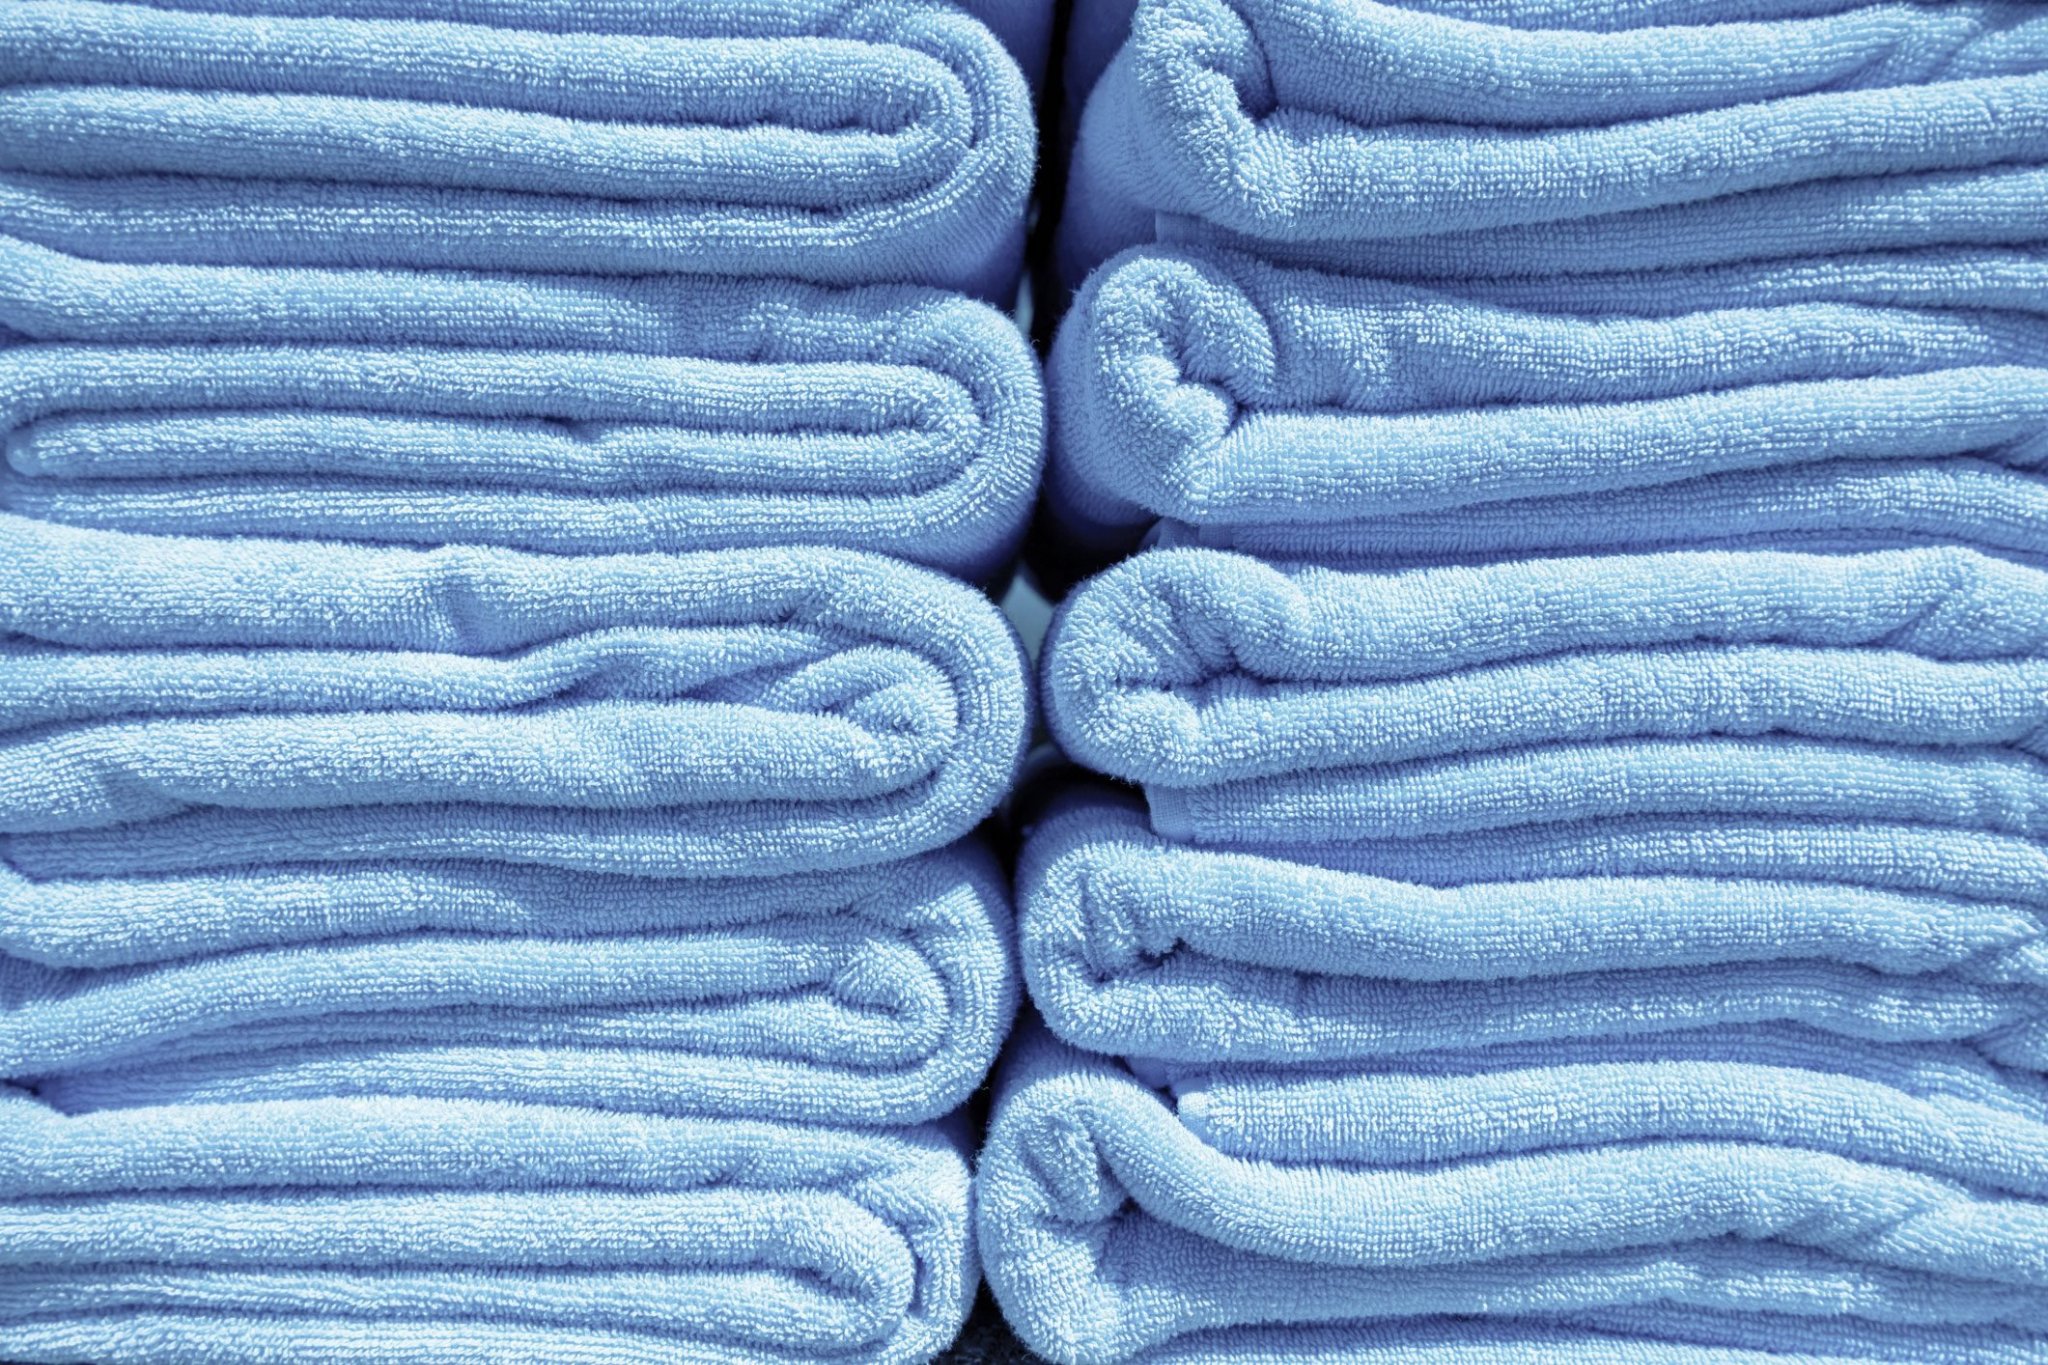 How to Wash Your Towels to Keep Them Clean and Fluffy